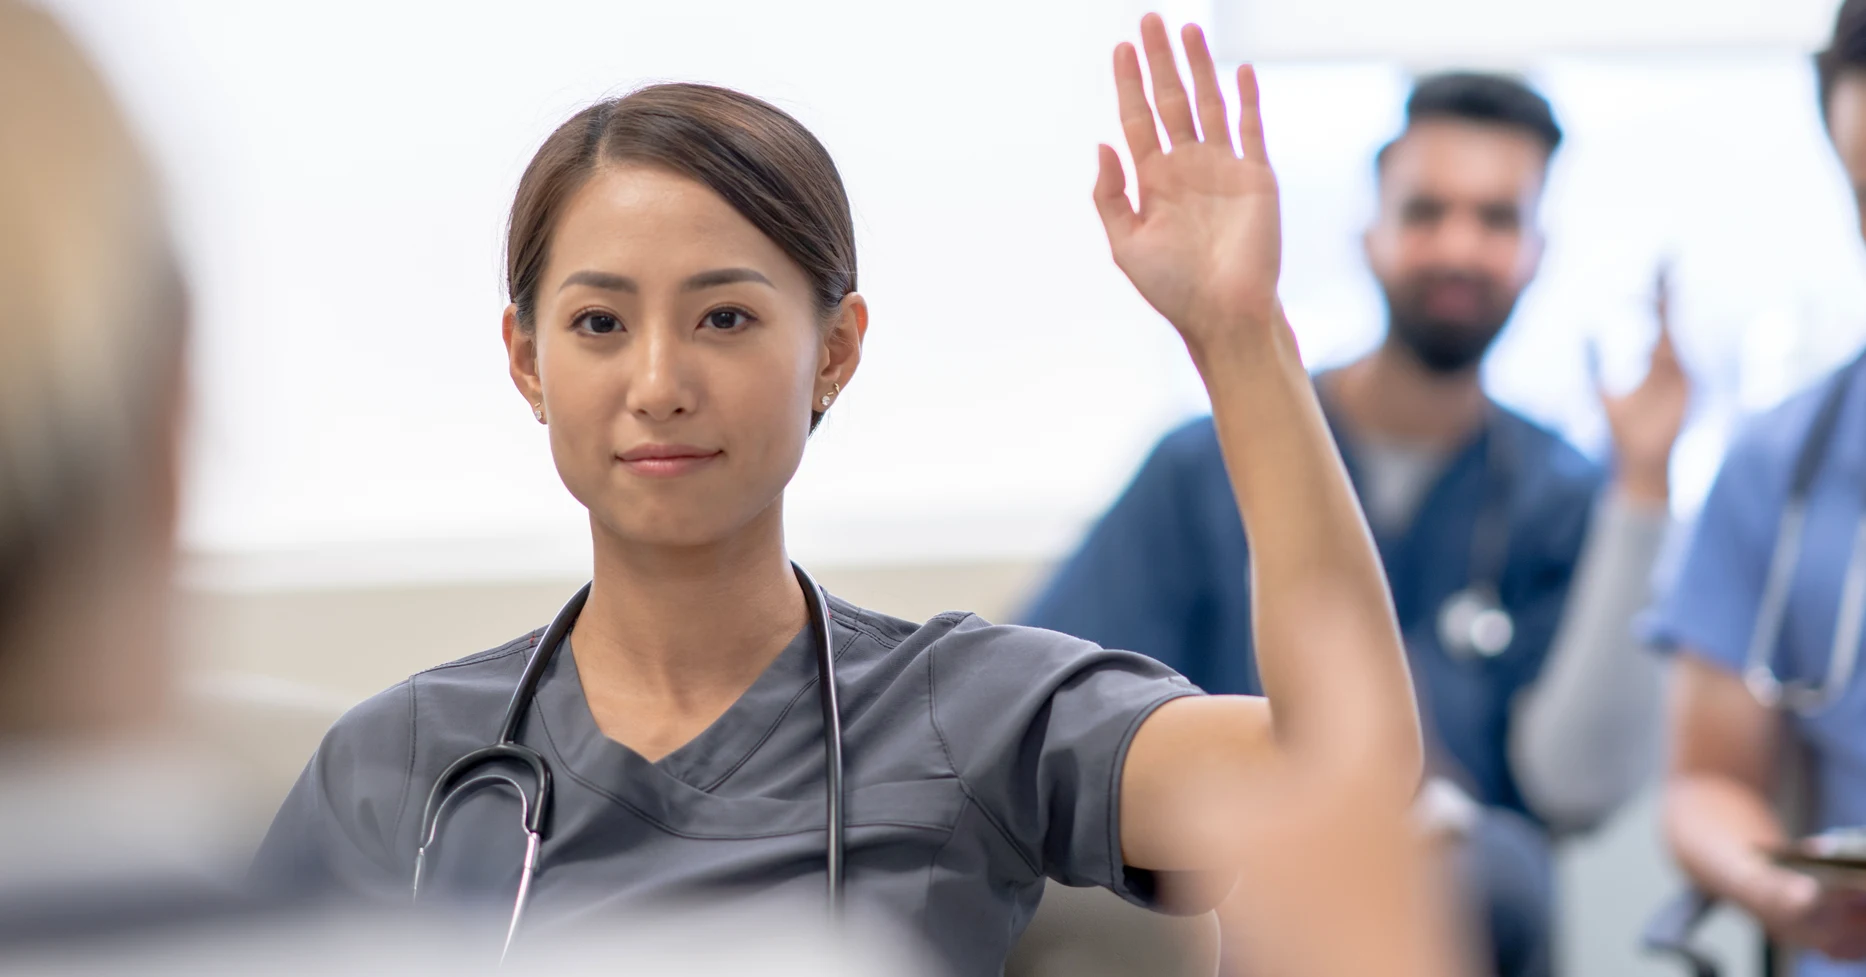 Nurse raising hand to ask question in room with other nurses